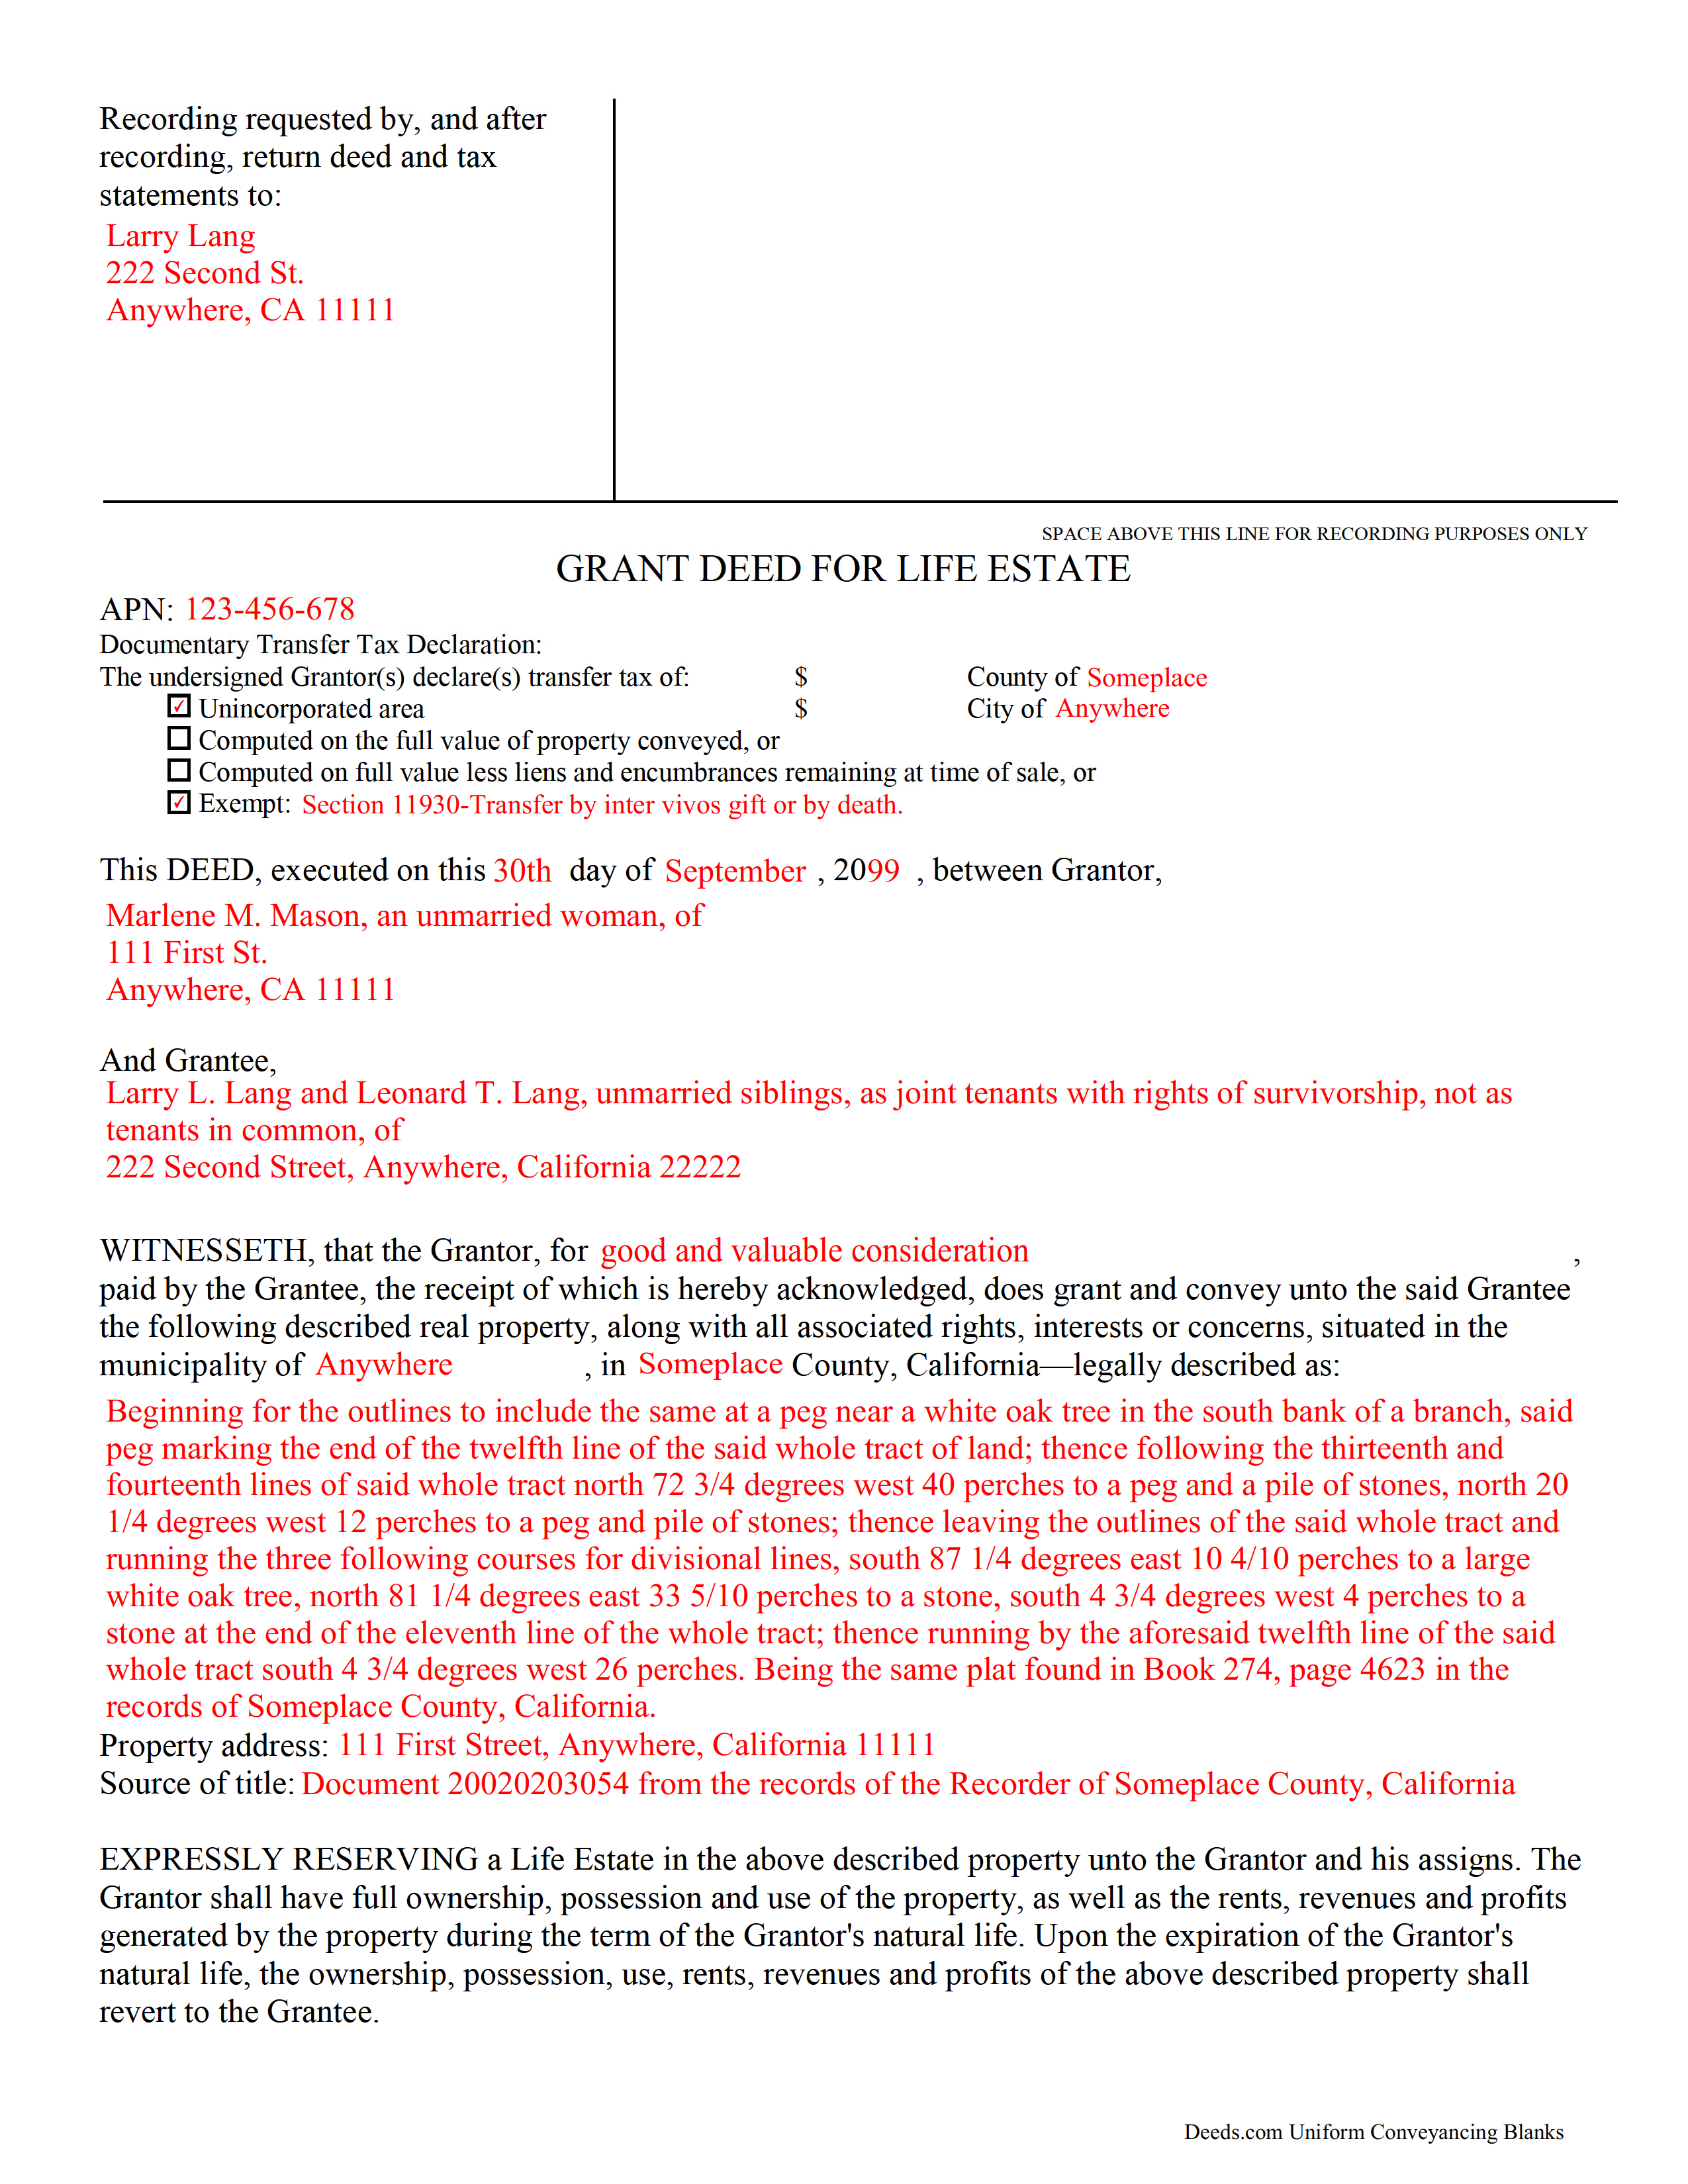 Completed Example of a Grant Deed for Life Estate Document